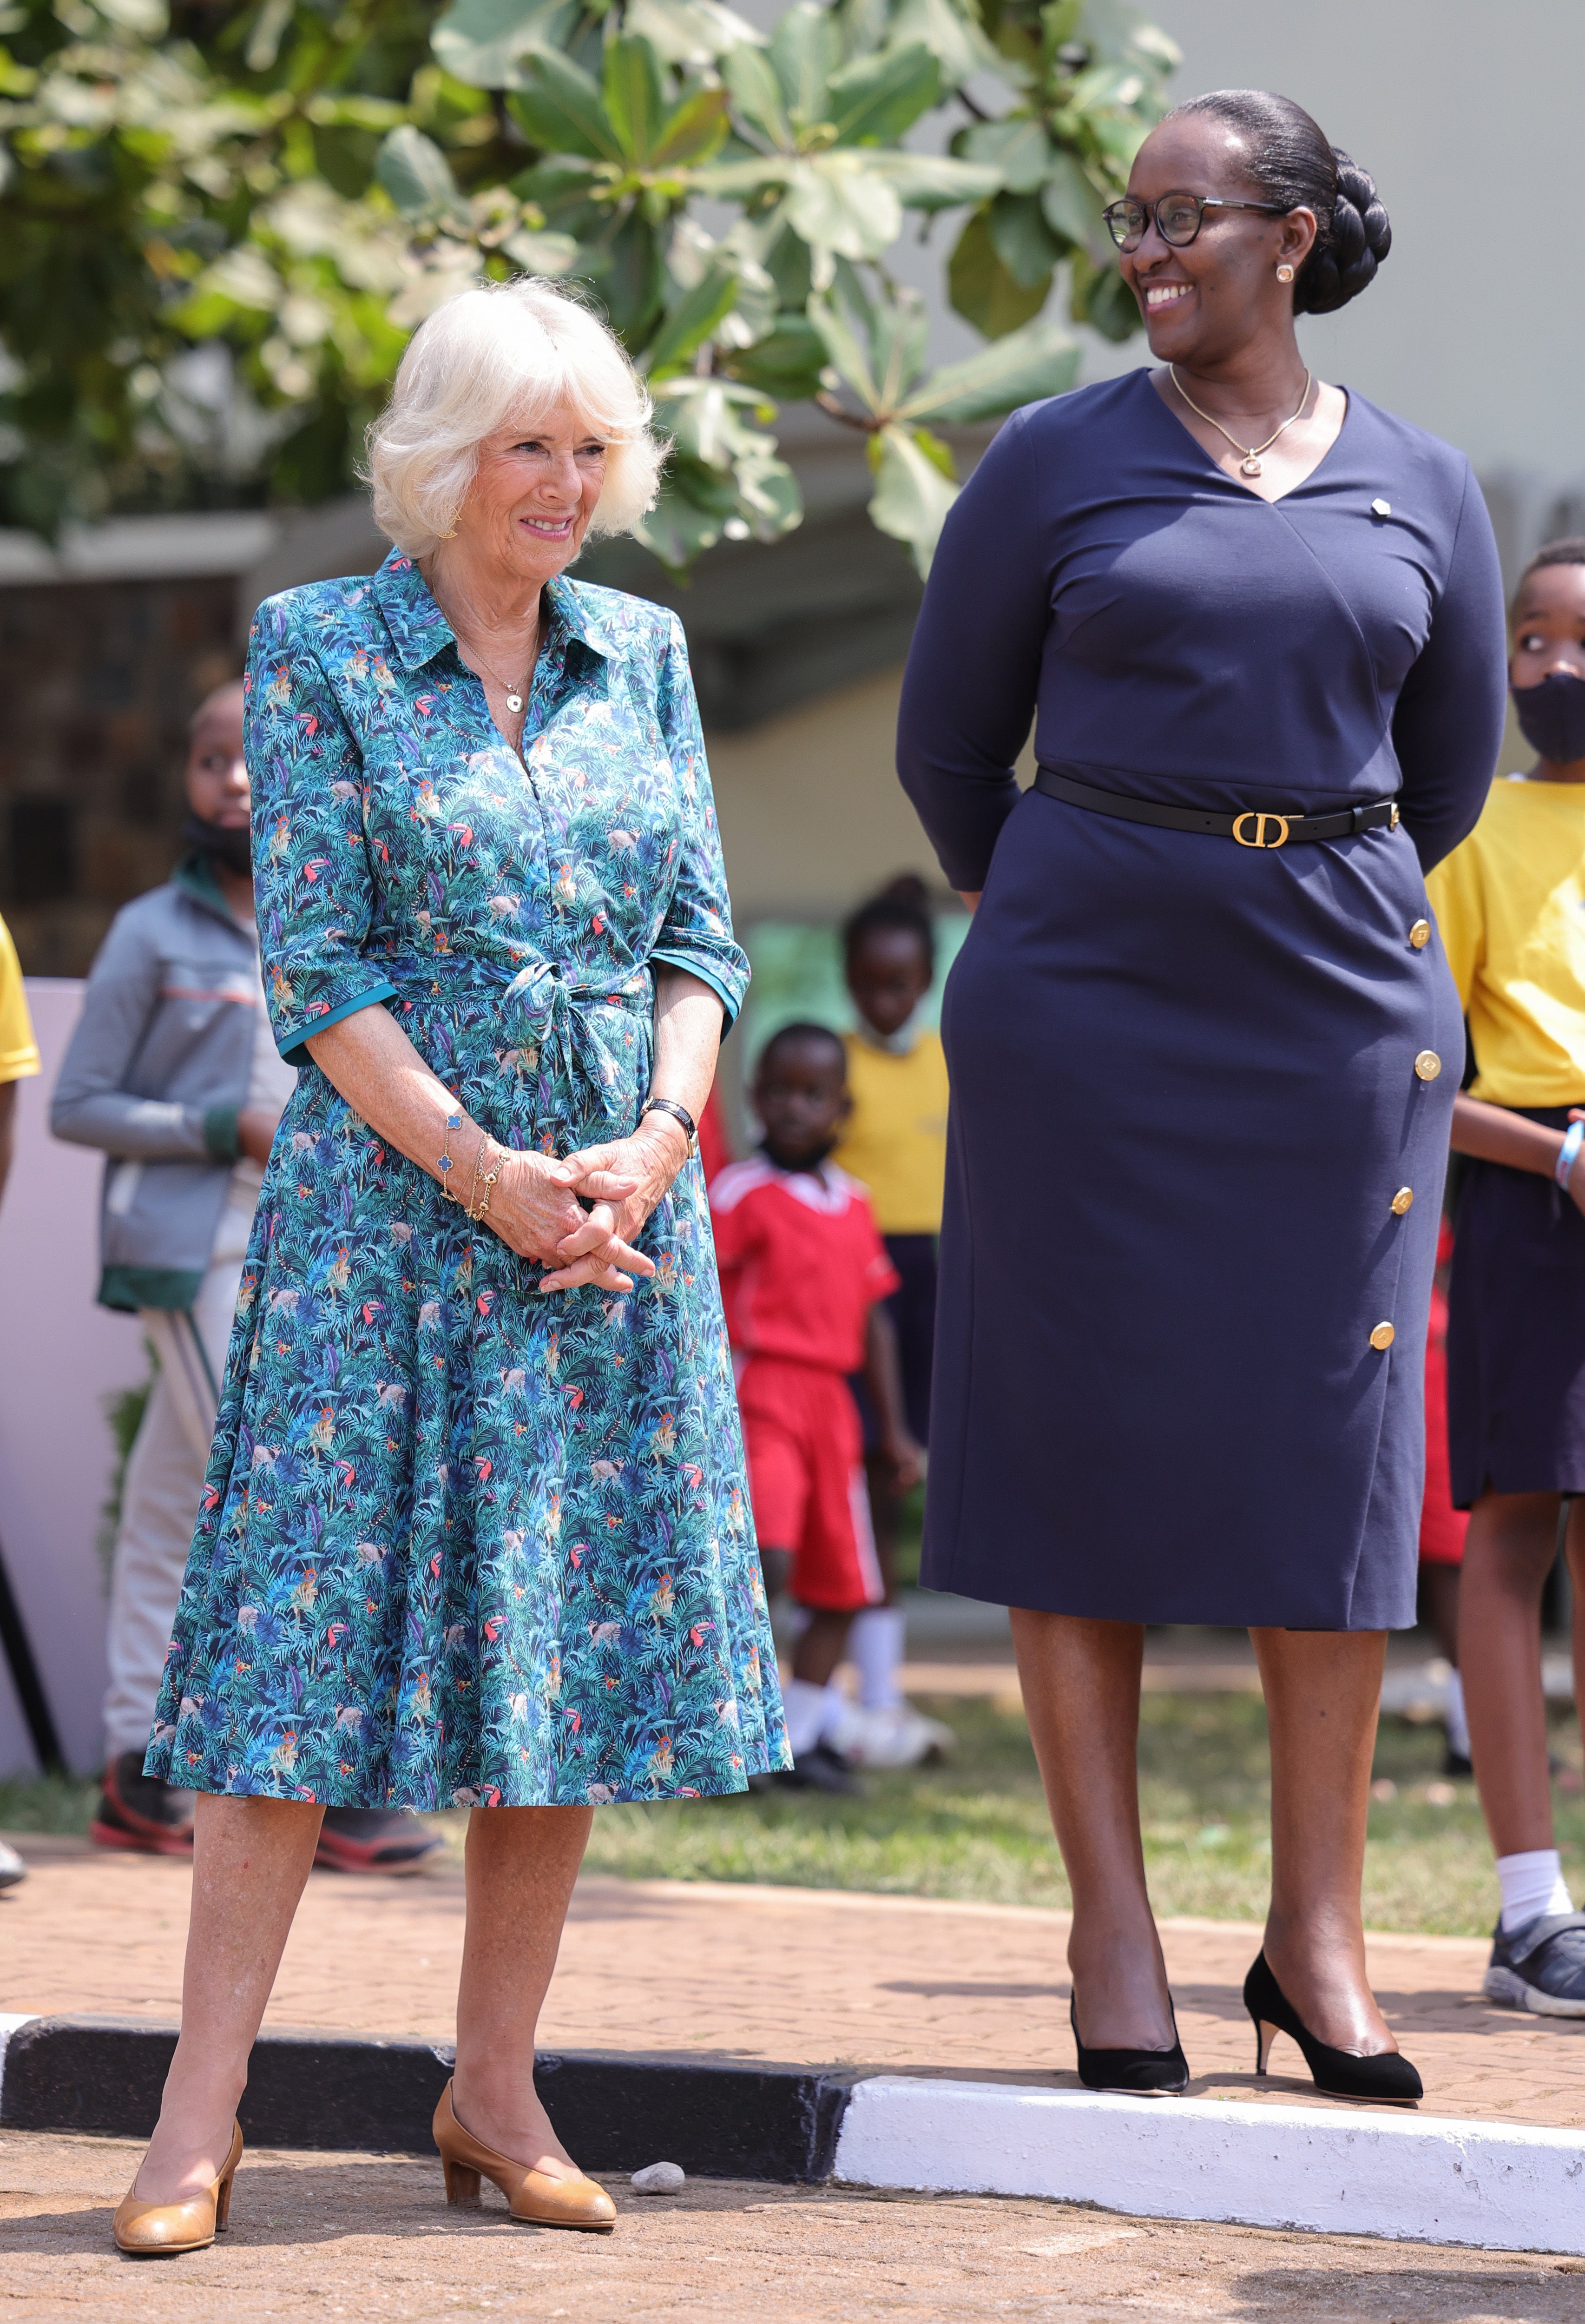 The Duchess of Cornwall (left) and H.E. Jeannette Kagame, the First Lady of the Republic of Rwanda (Chris Jackson/PA)